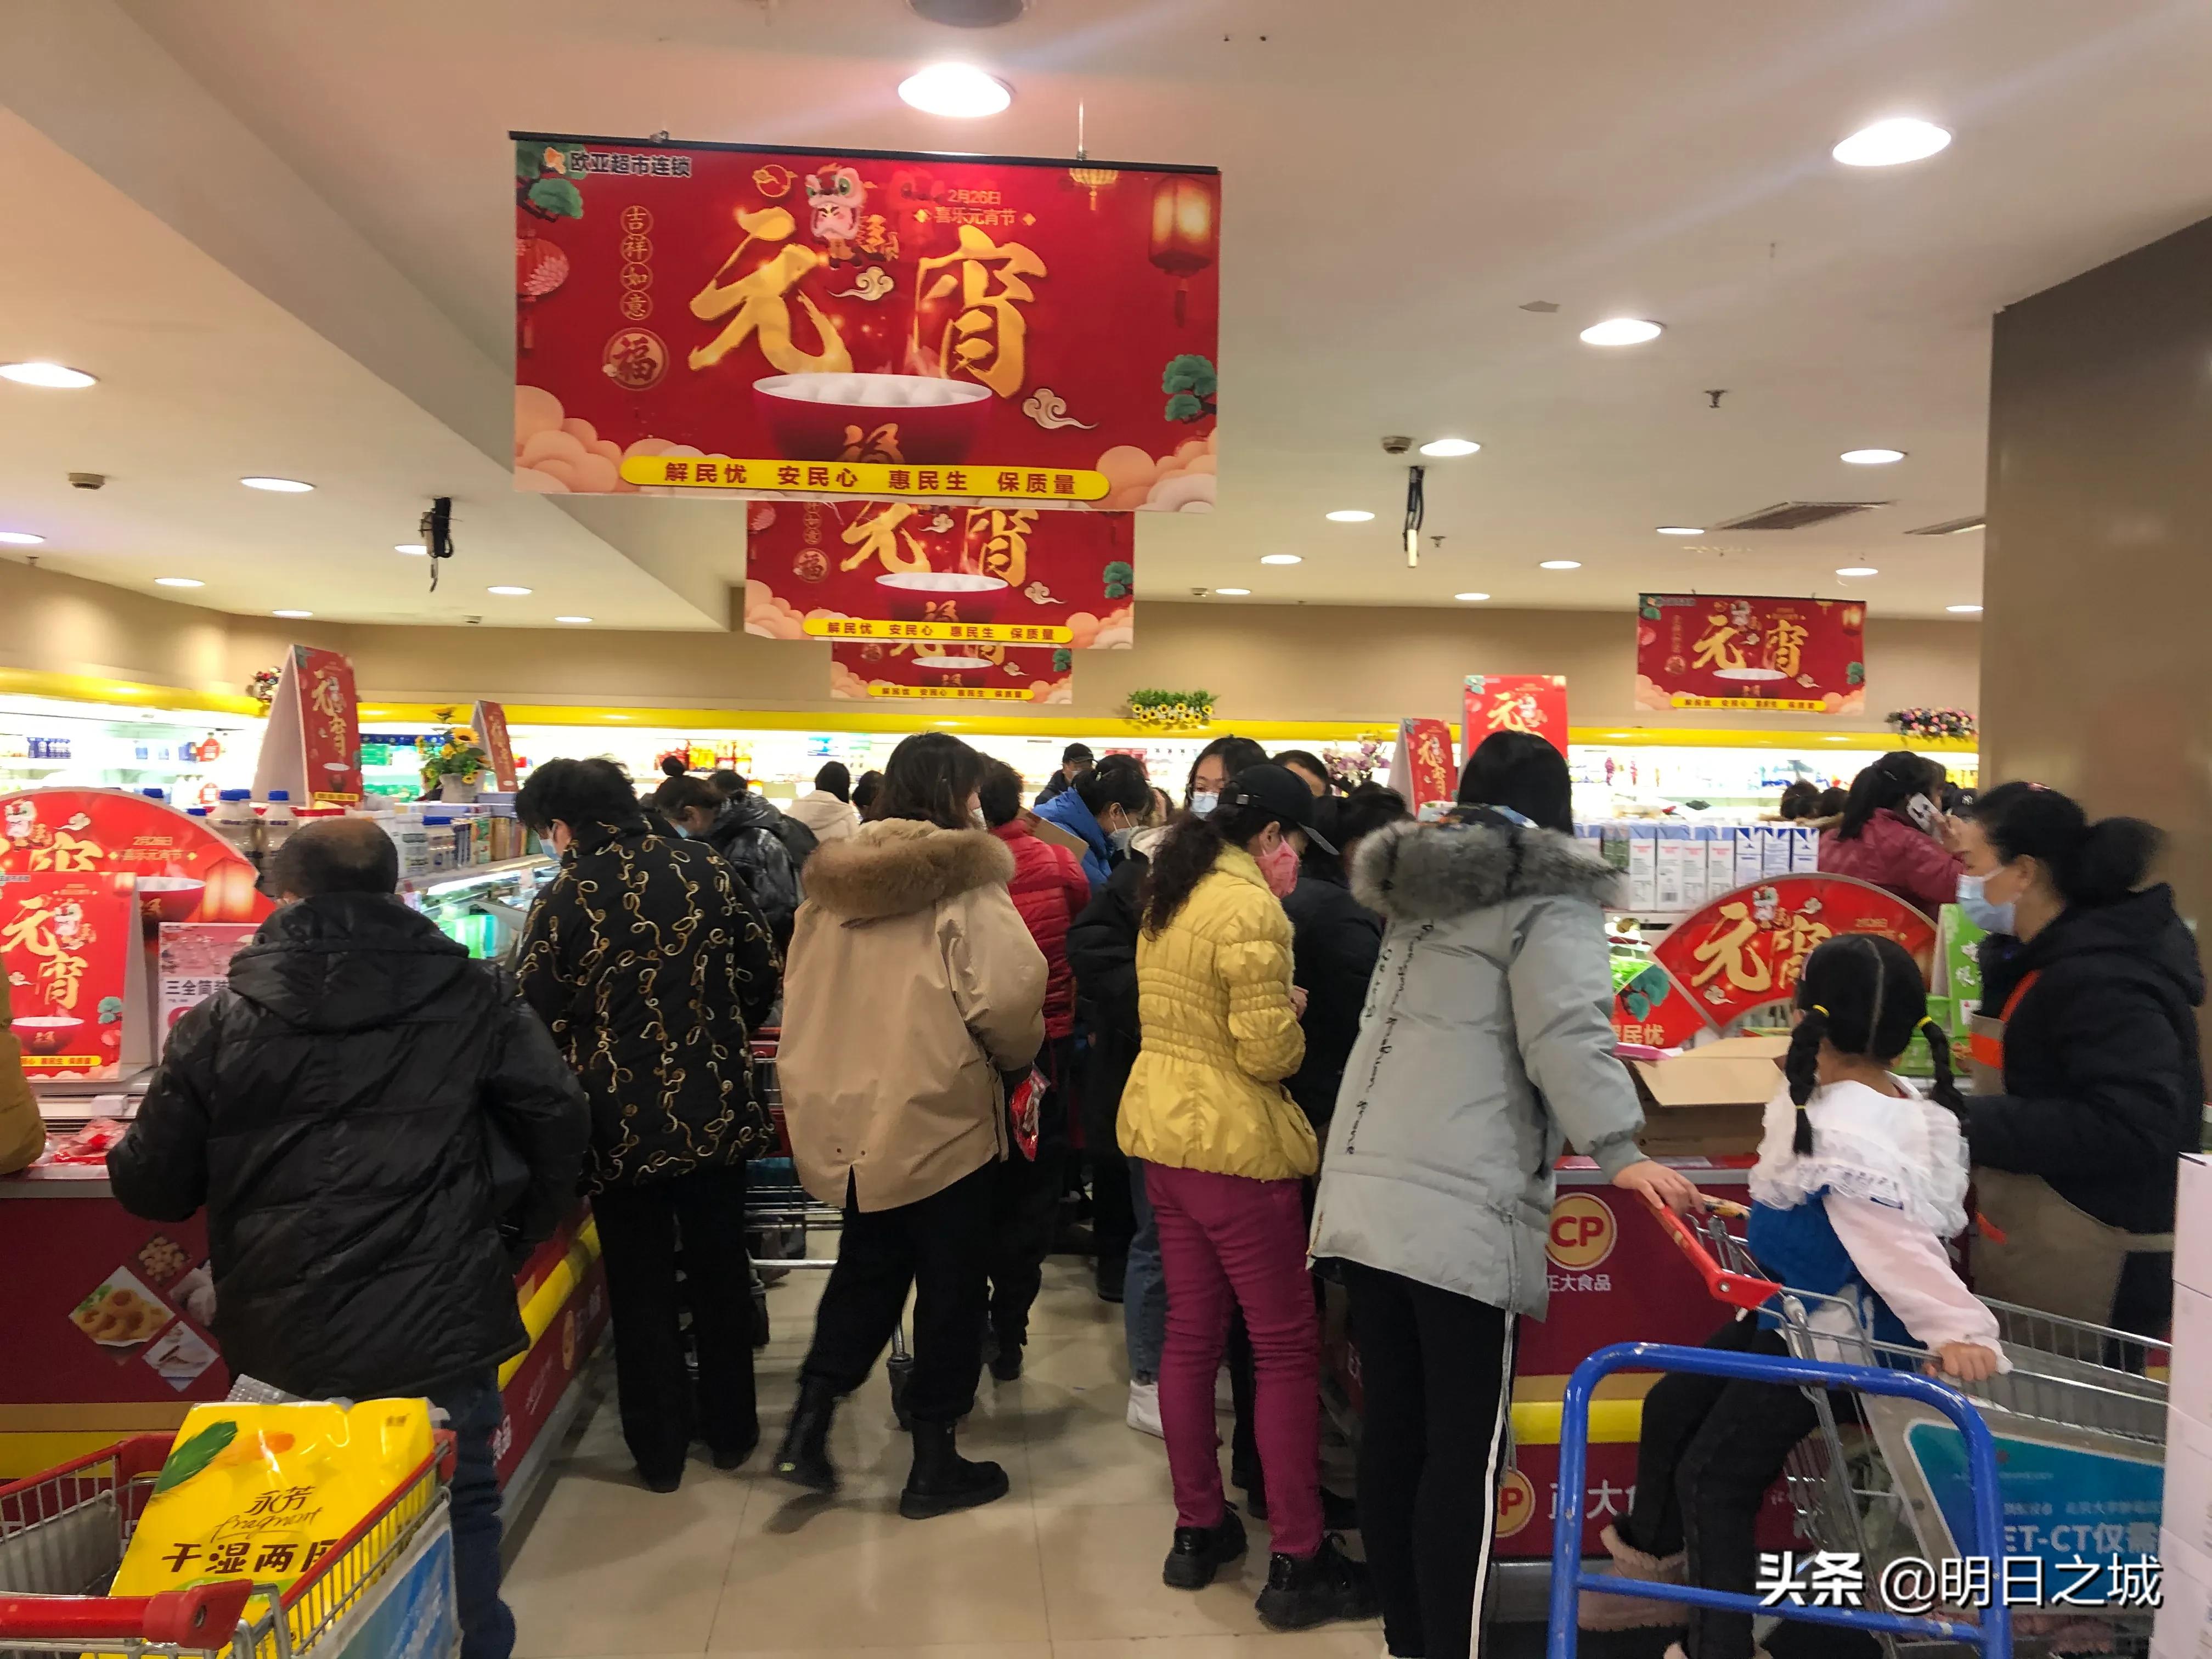 Eve of festival of lanterns, this supermarket stuffed dumplings masse of glutinous rice flour served in soup sells Changchun mad! 